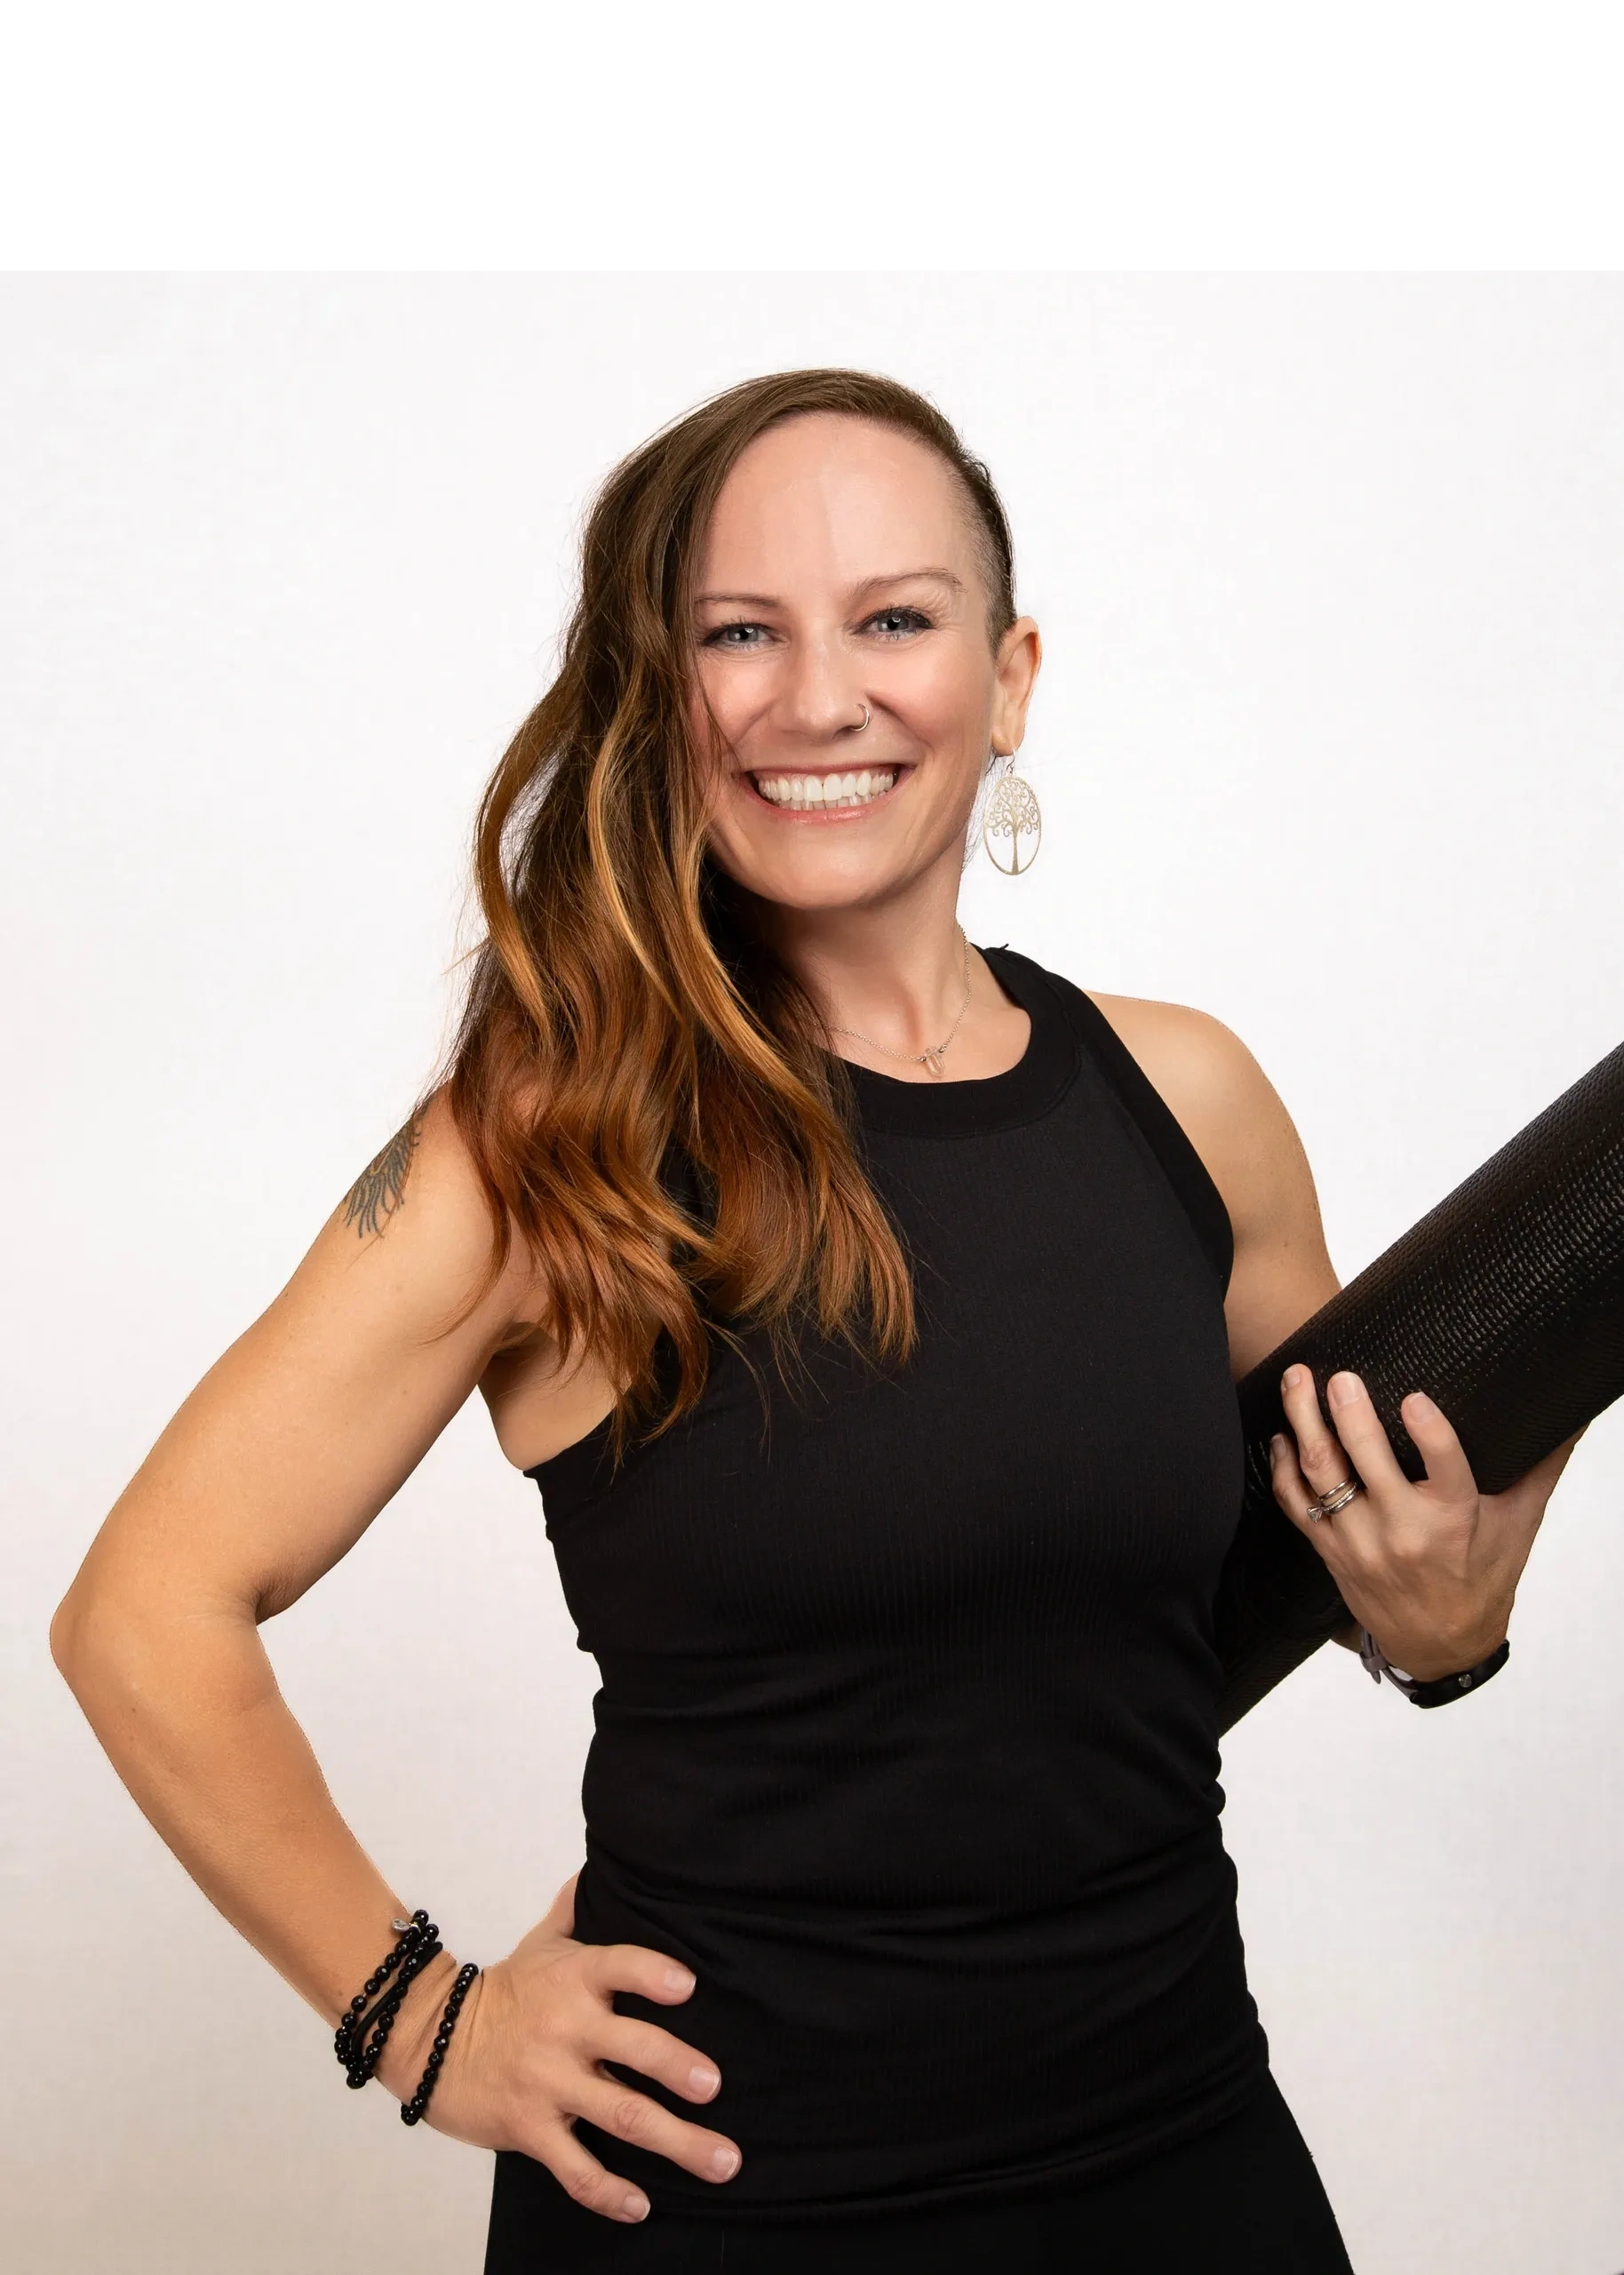 A smiling woman dressed in black athletic clothes holding a yoga mat